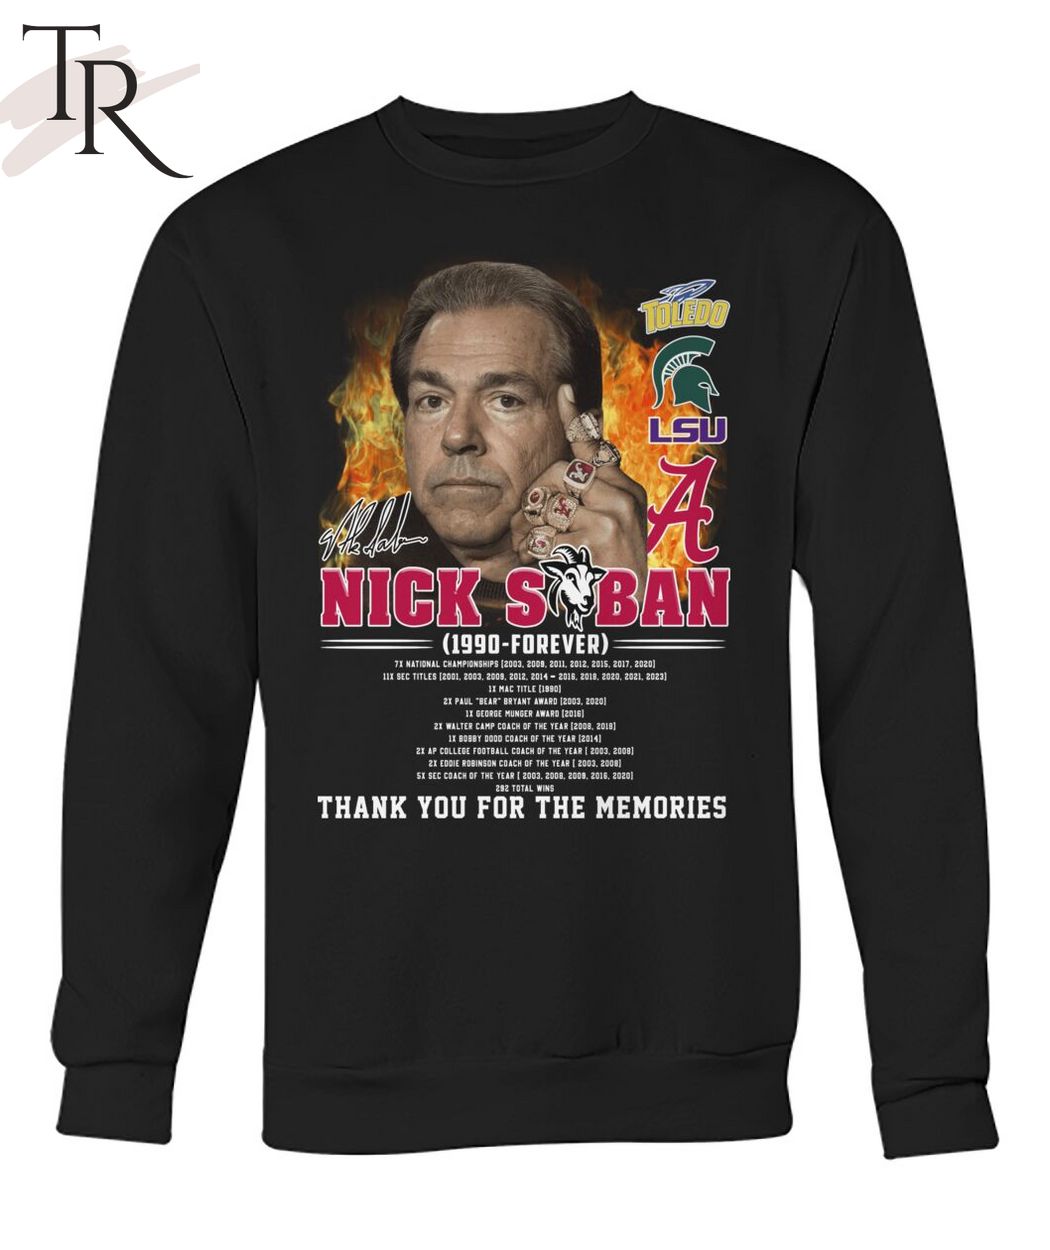 Nick Saban 1990 - Forever Thank You For The Memories T-Shirt